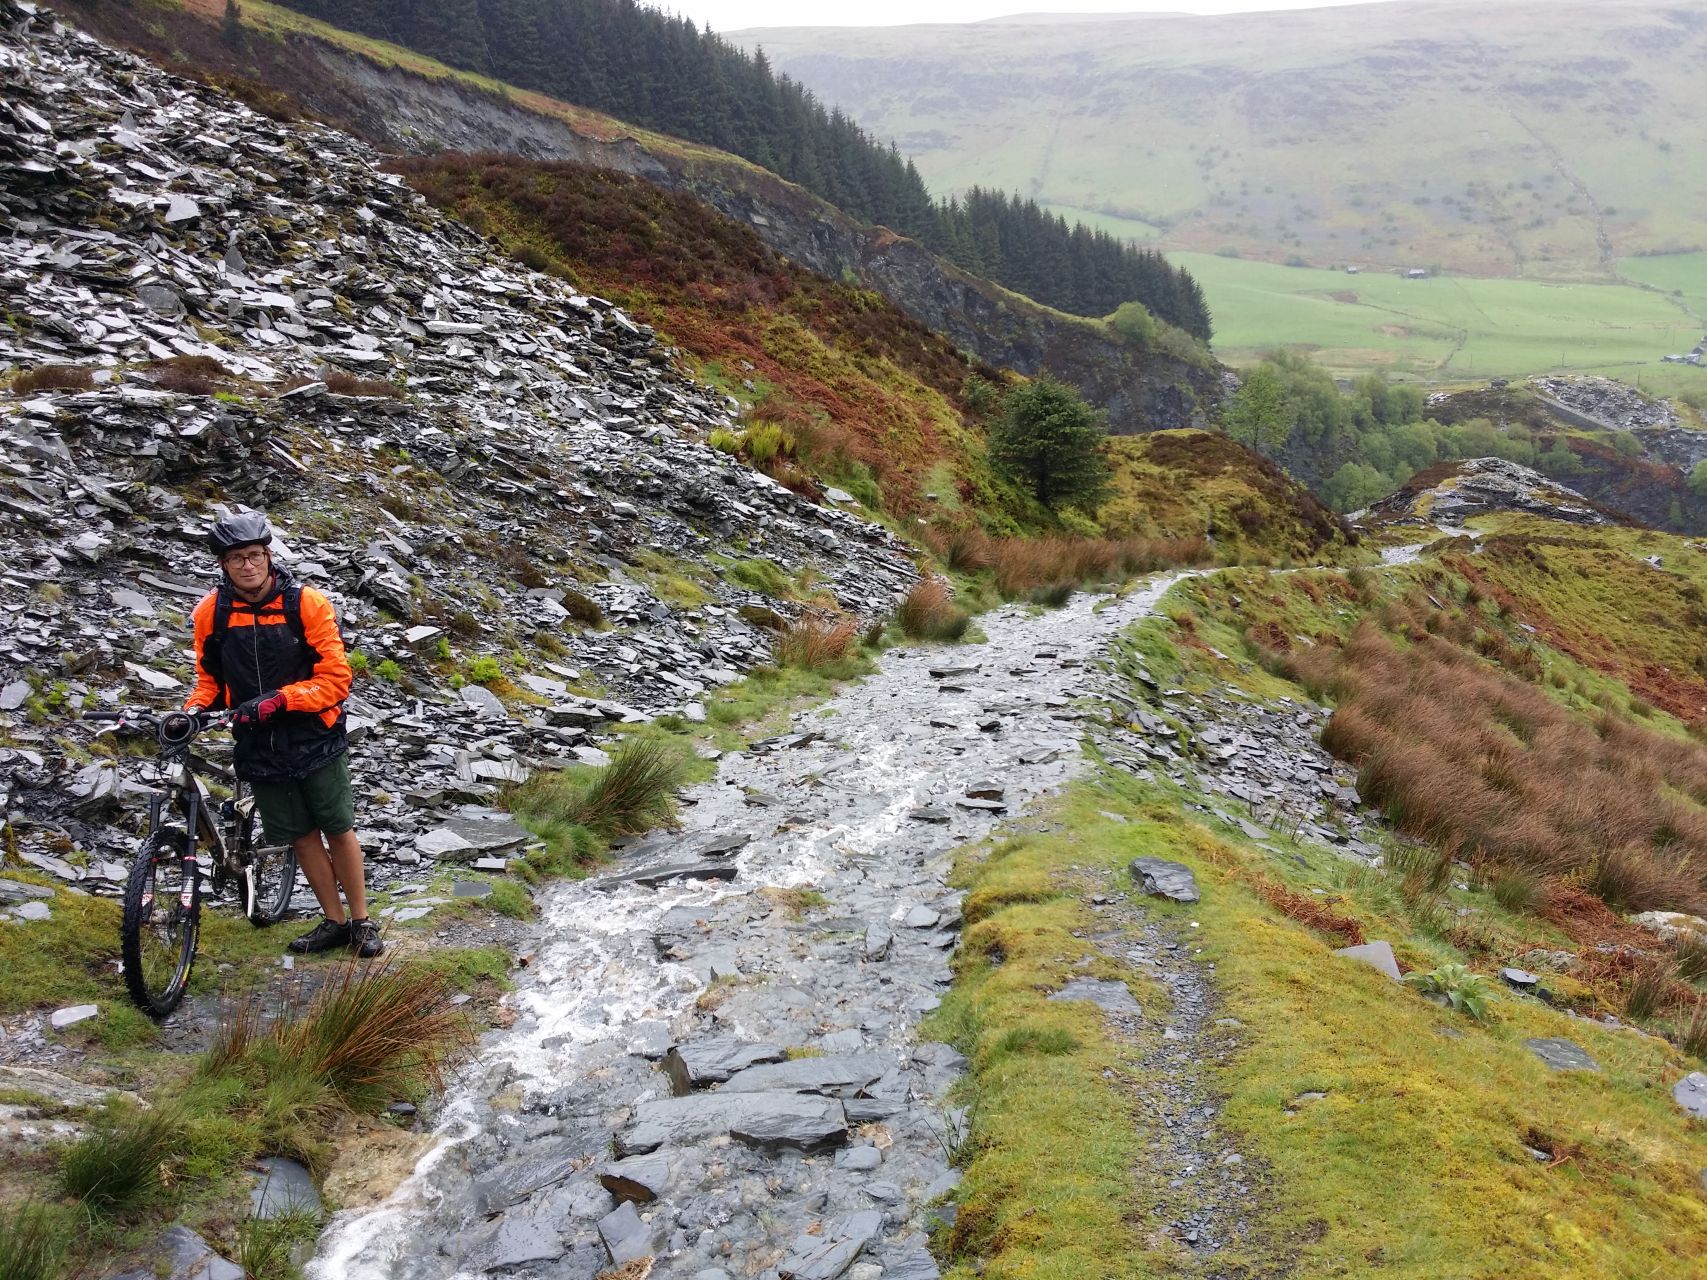 Day 2 - Paul on "path" out of Cwm Penmachno toward the Manod Mawr quarries